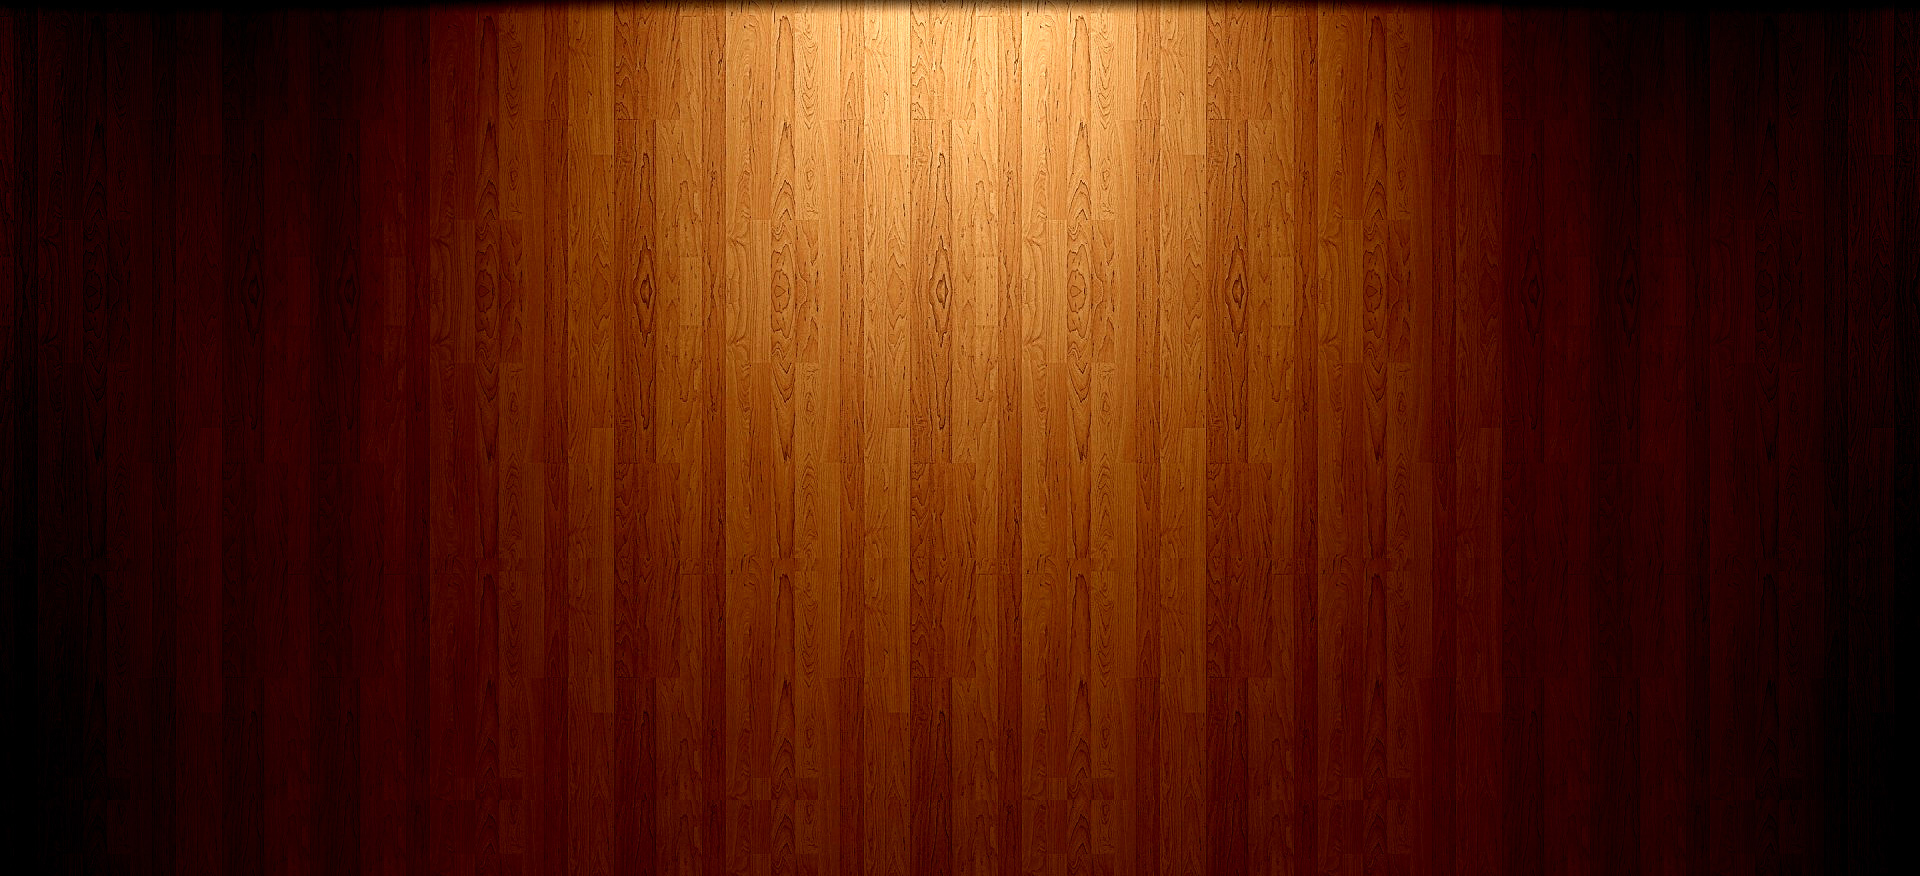 Wood Background with Light shining on text